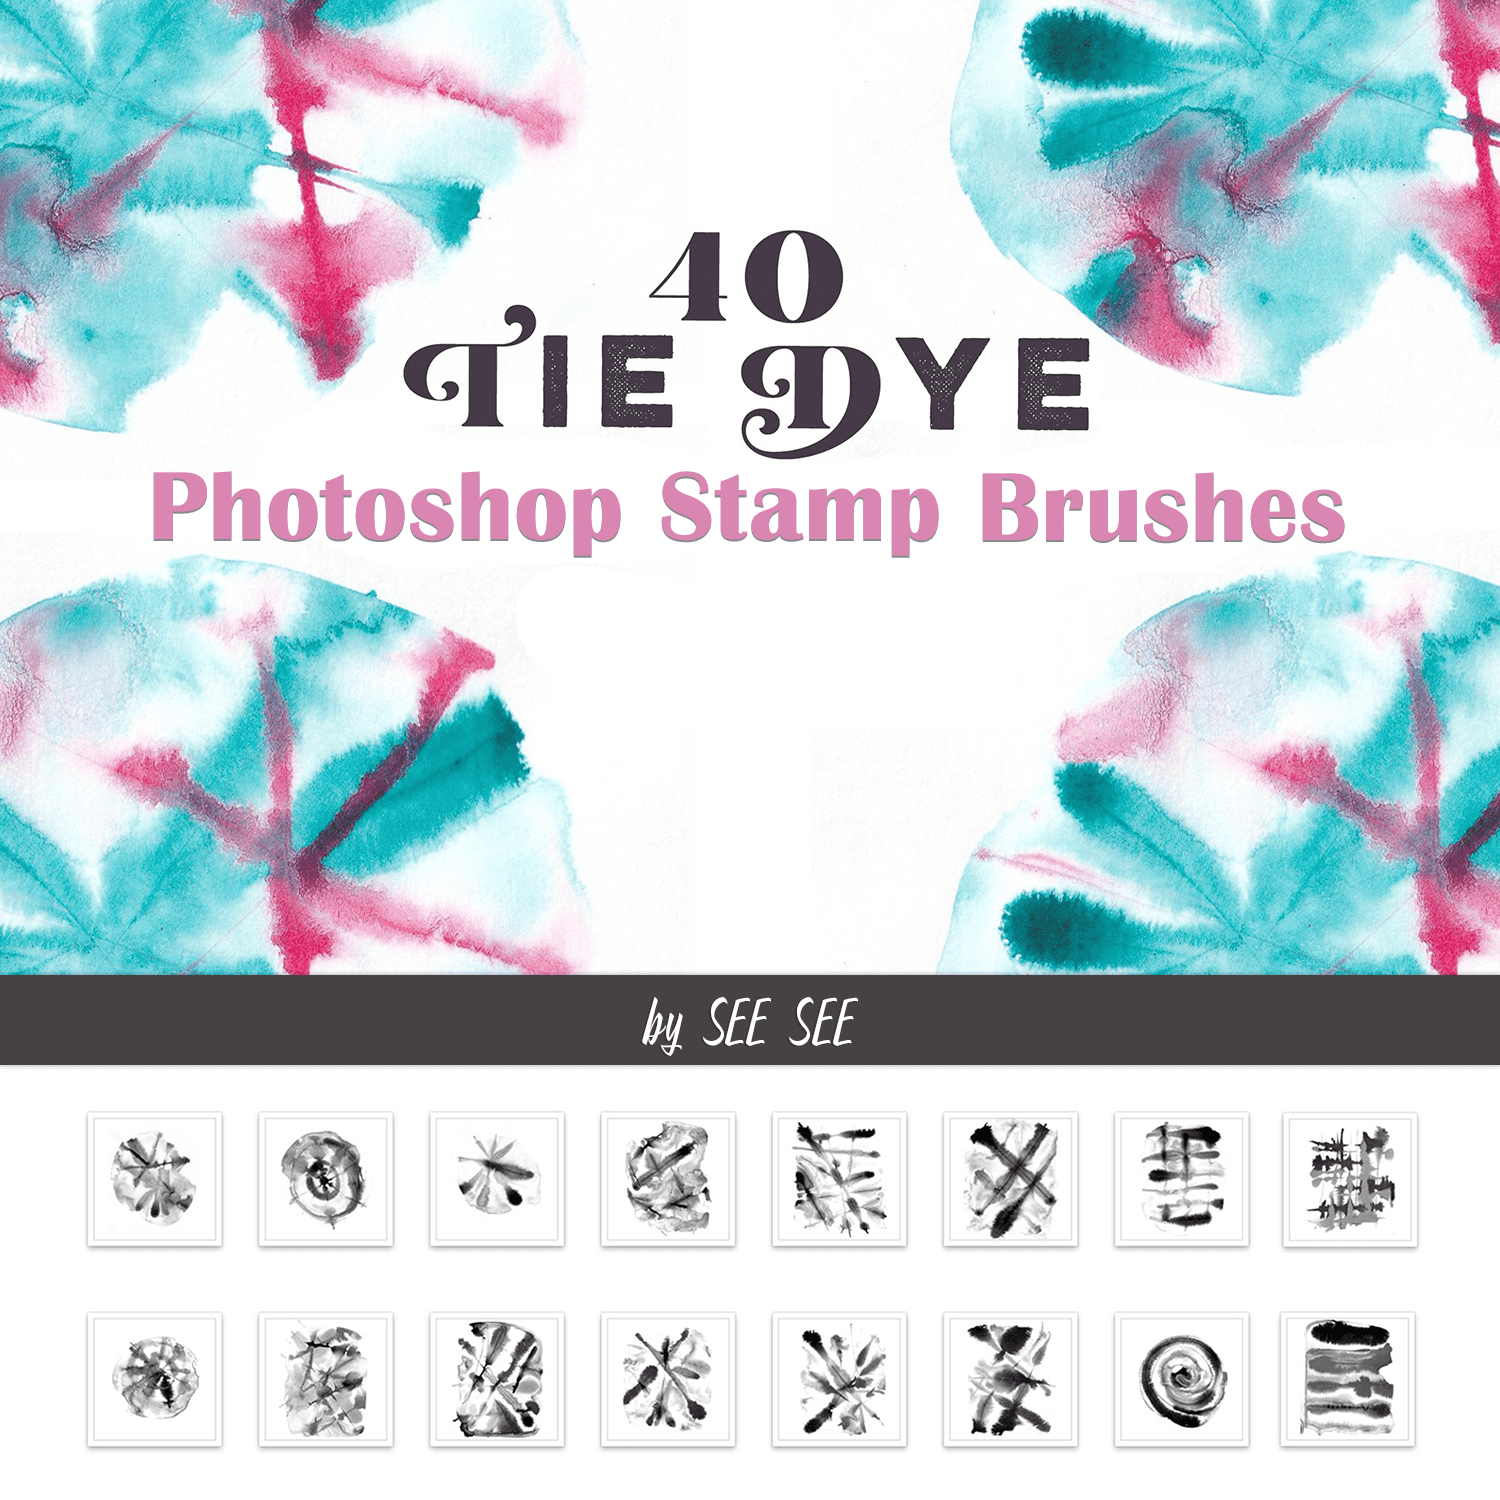 19 Tie Dye Photoshop Stamp Brushes created by SEE SEE.